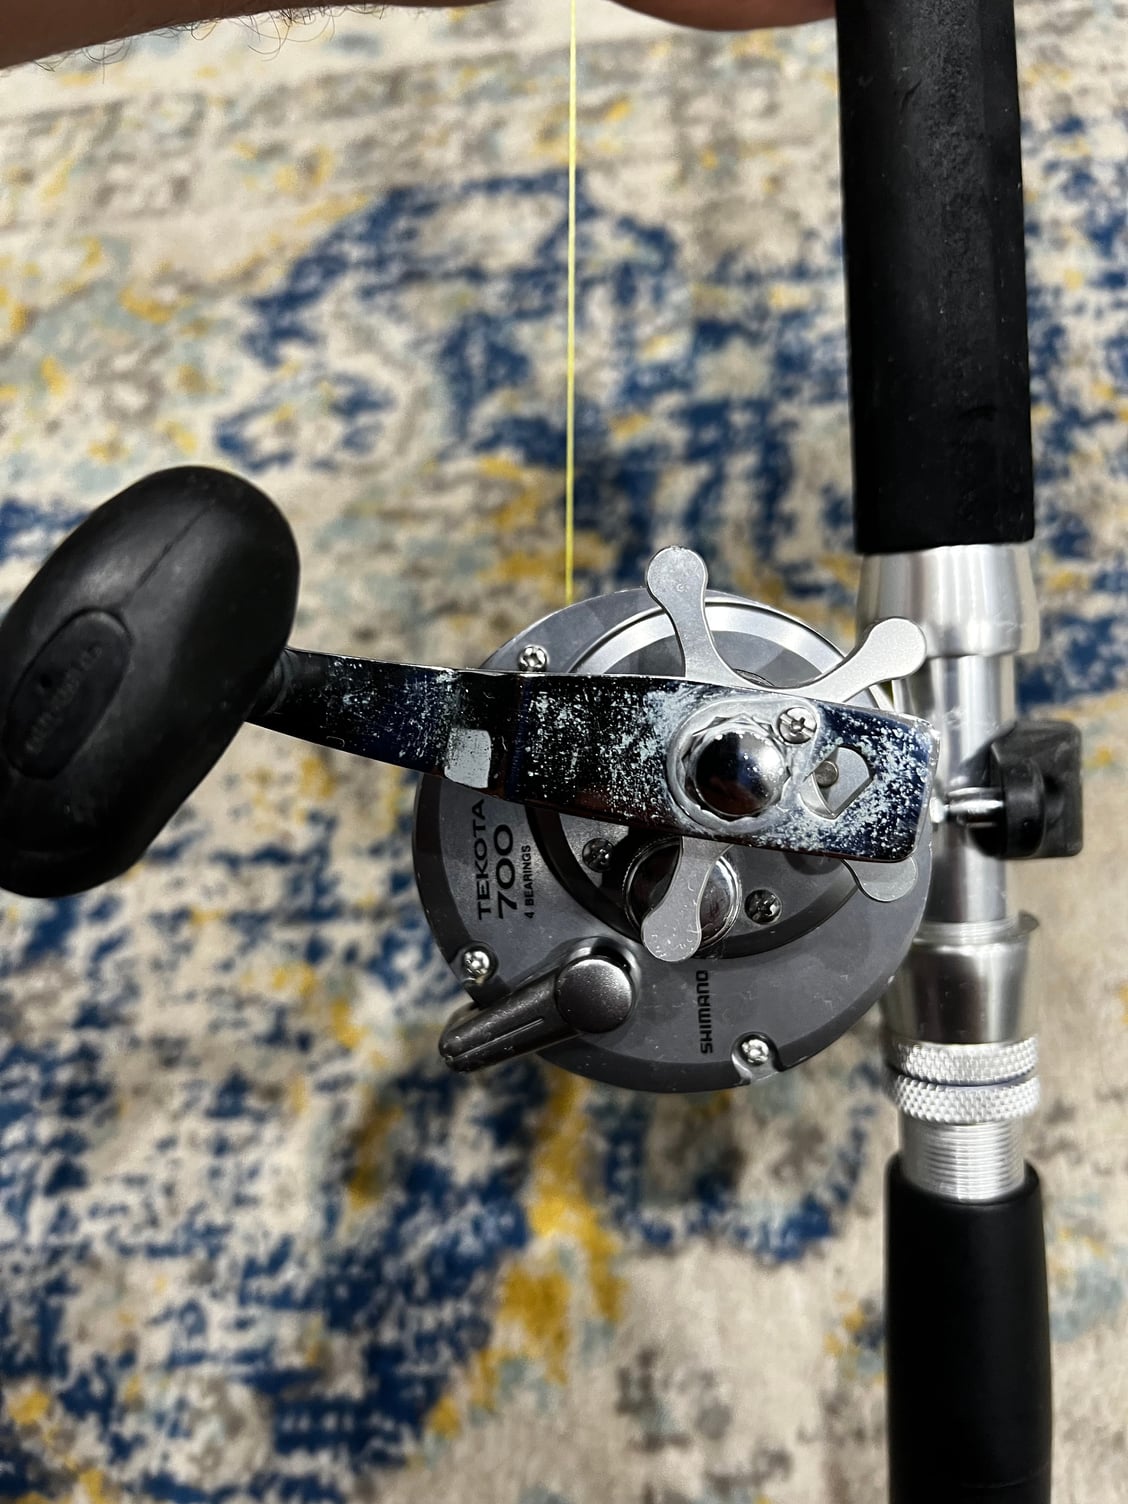 Shimano Tekota 700 Reels & Bloody Point Tackle Rods For Sal - The Hull  Truth - Boating and Fishing Forum